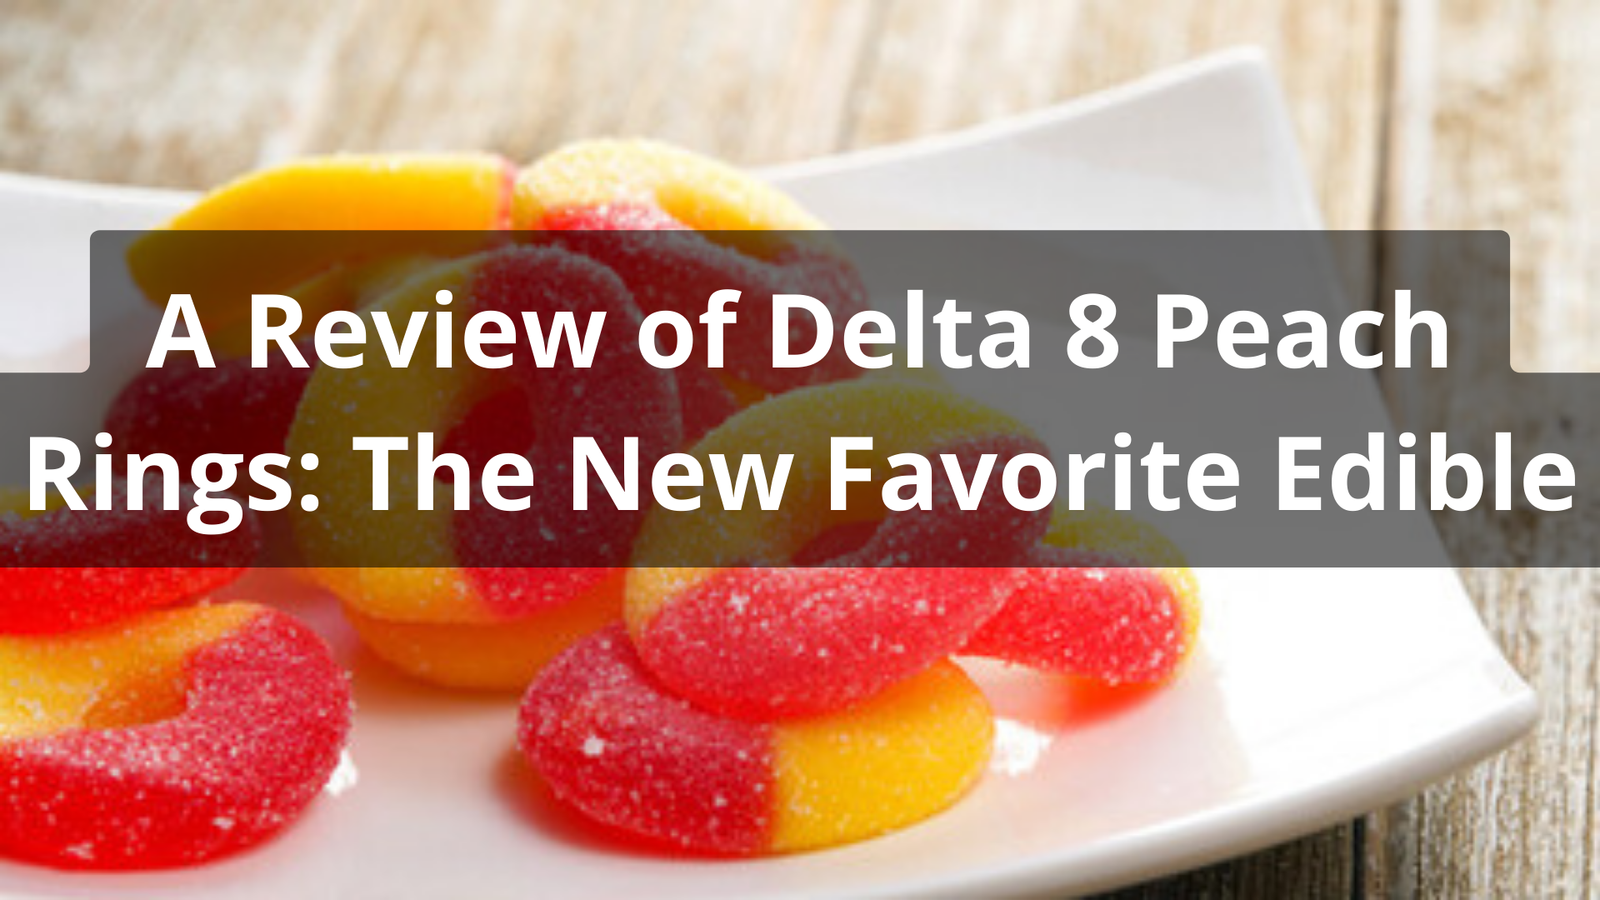 You are currently viewing A Review of Delta 8 Peach Rings: The New Favorite Edible